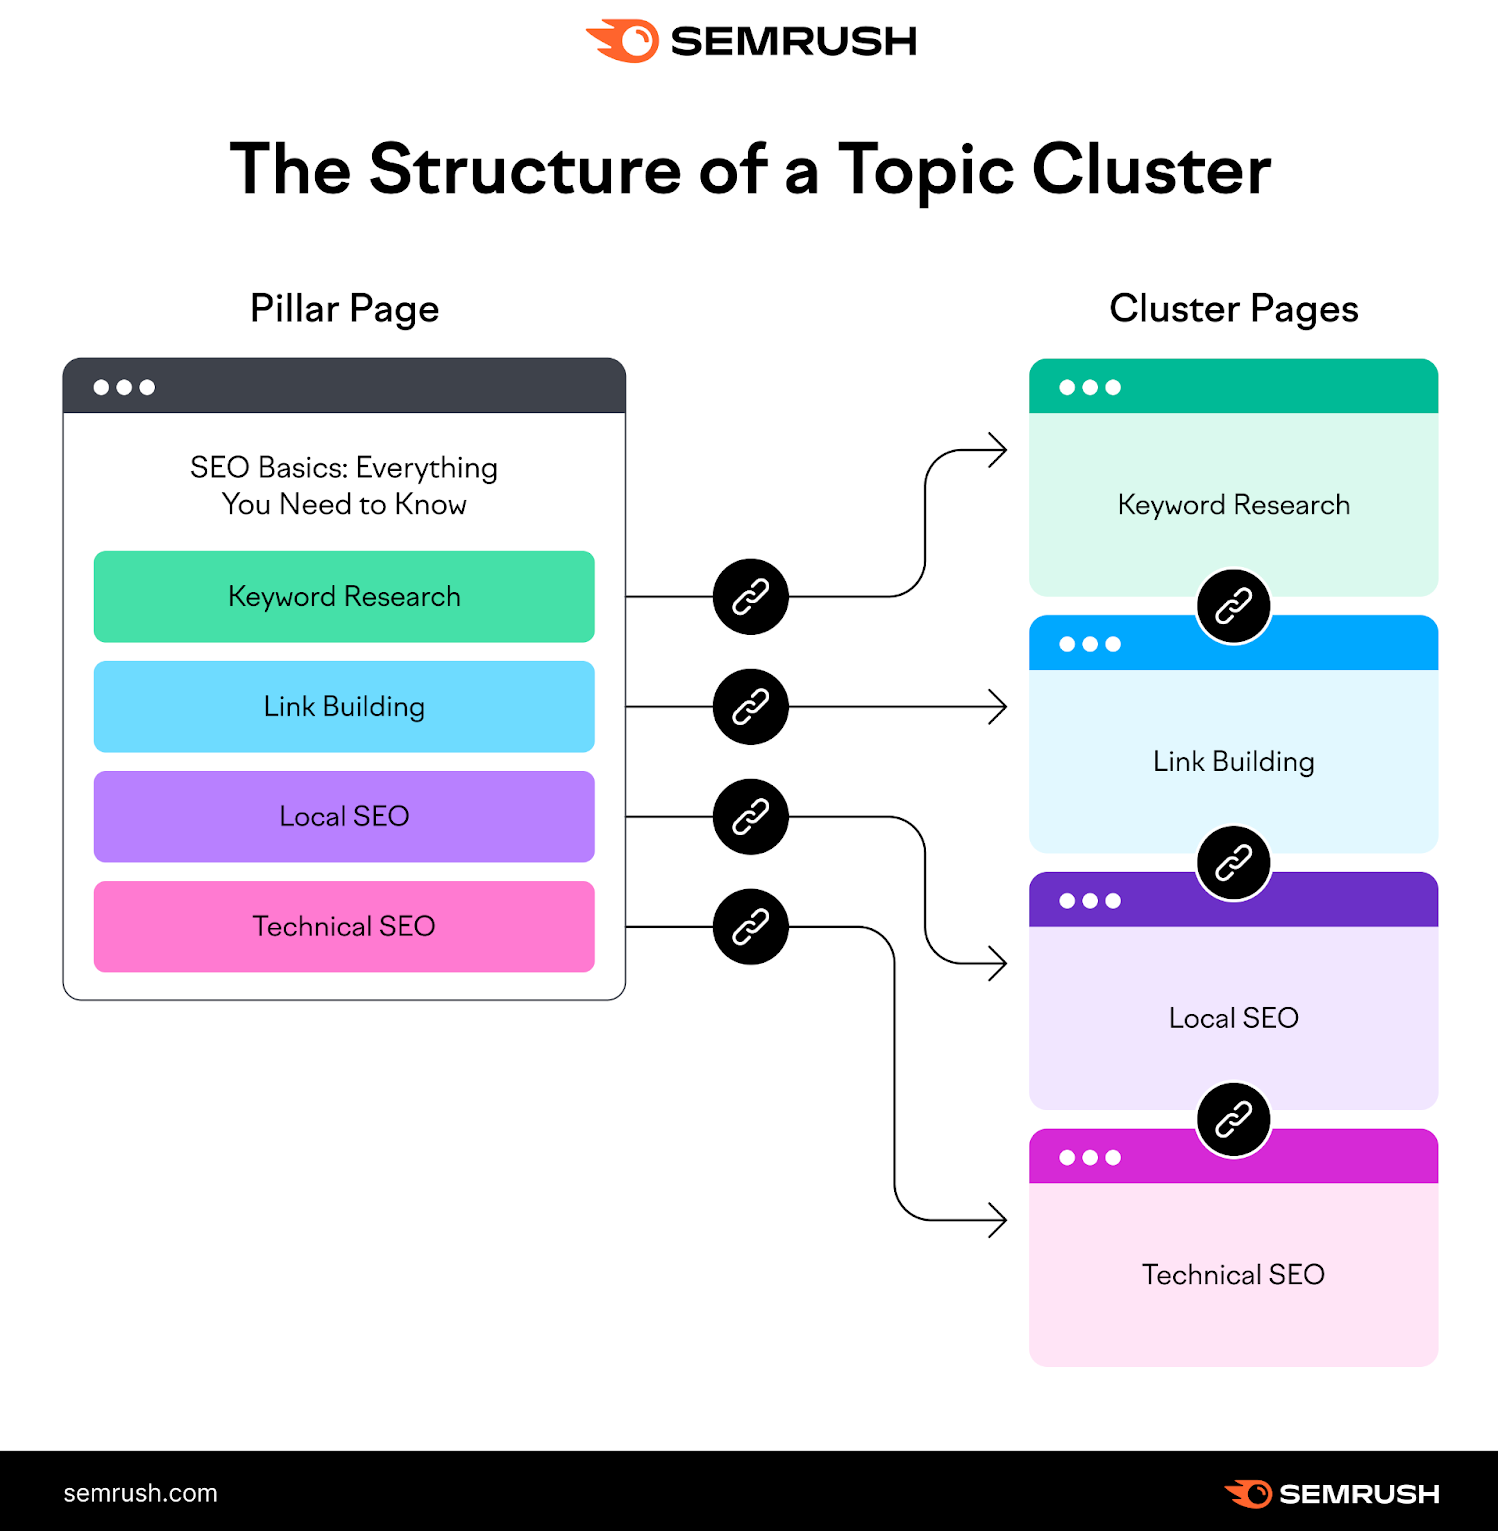 An infographic showing the structure of a topic cluster